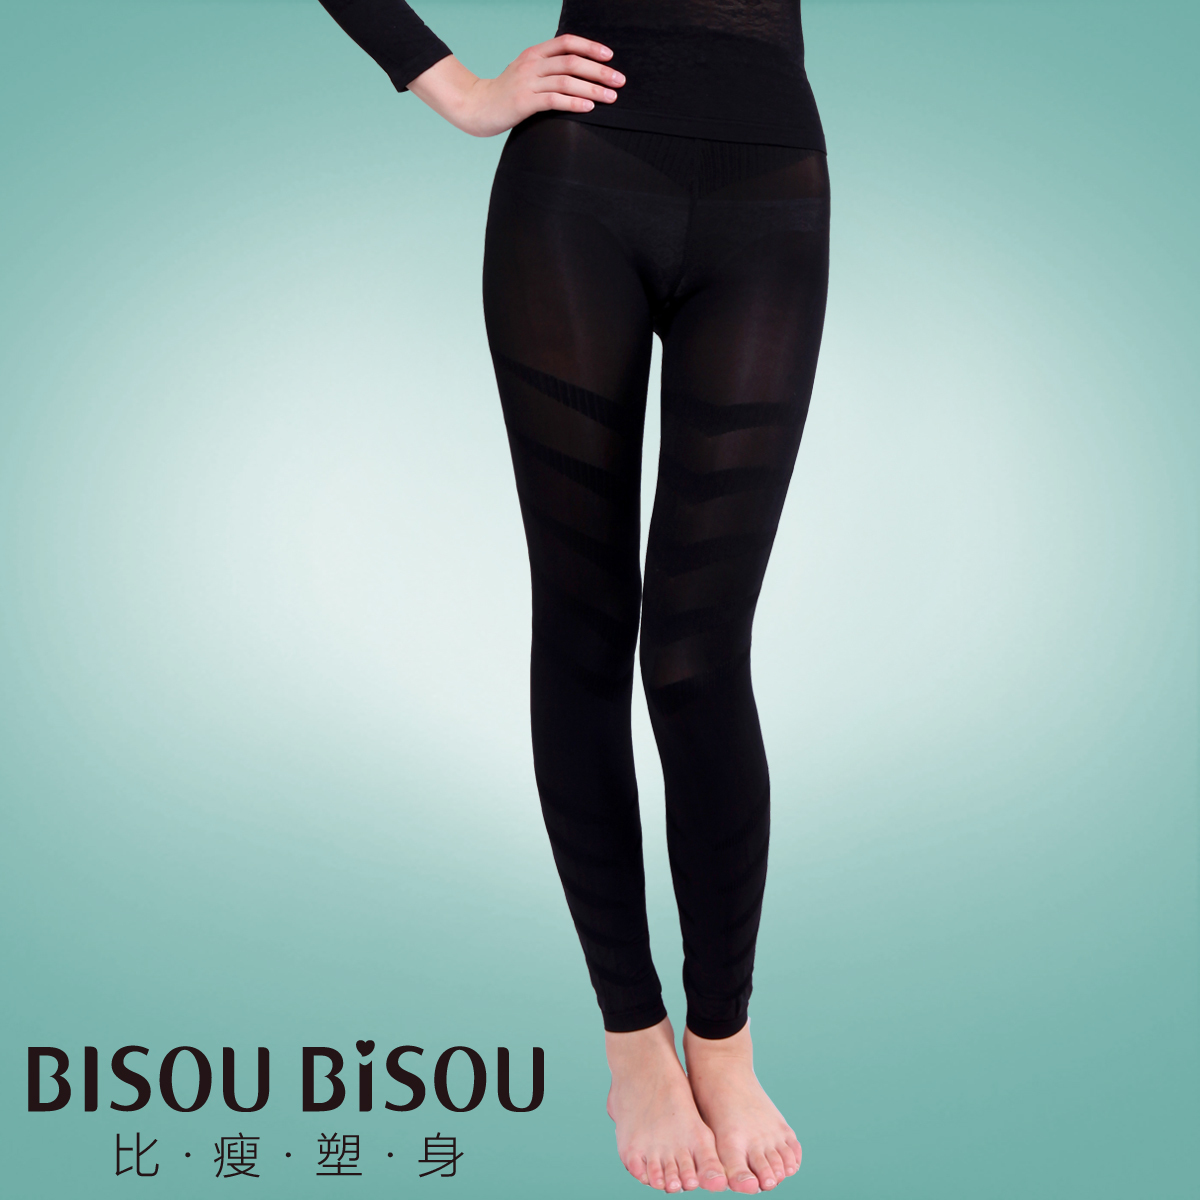 Bisou bisou cycle knitted body shaping abdomen drawing butt-lifting body shaping pants ankle length trousers